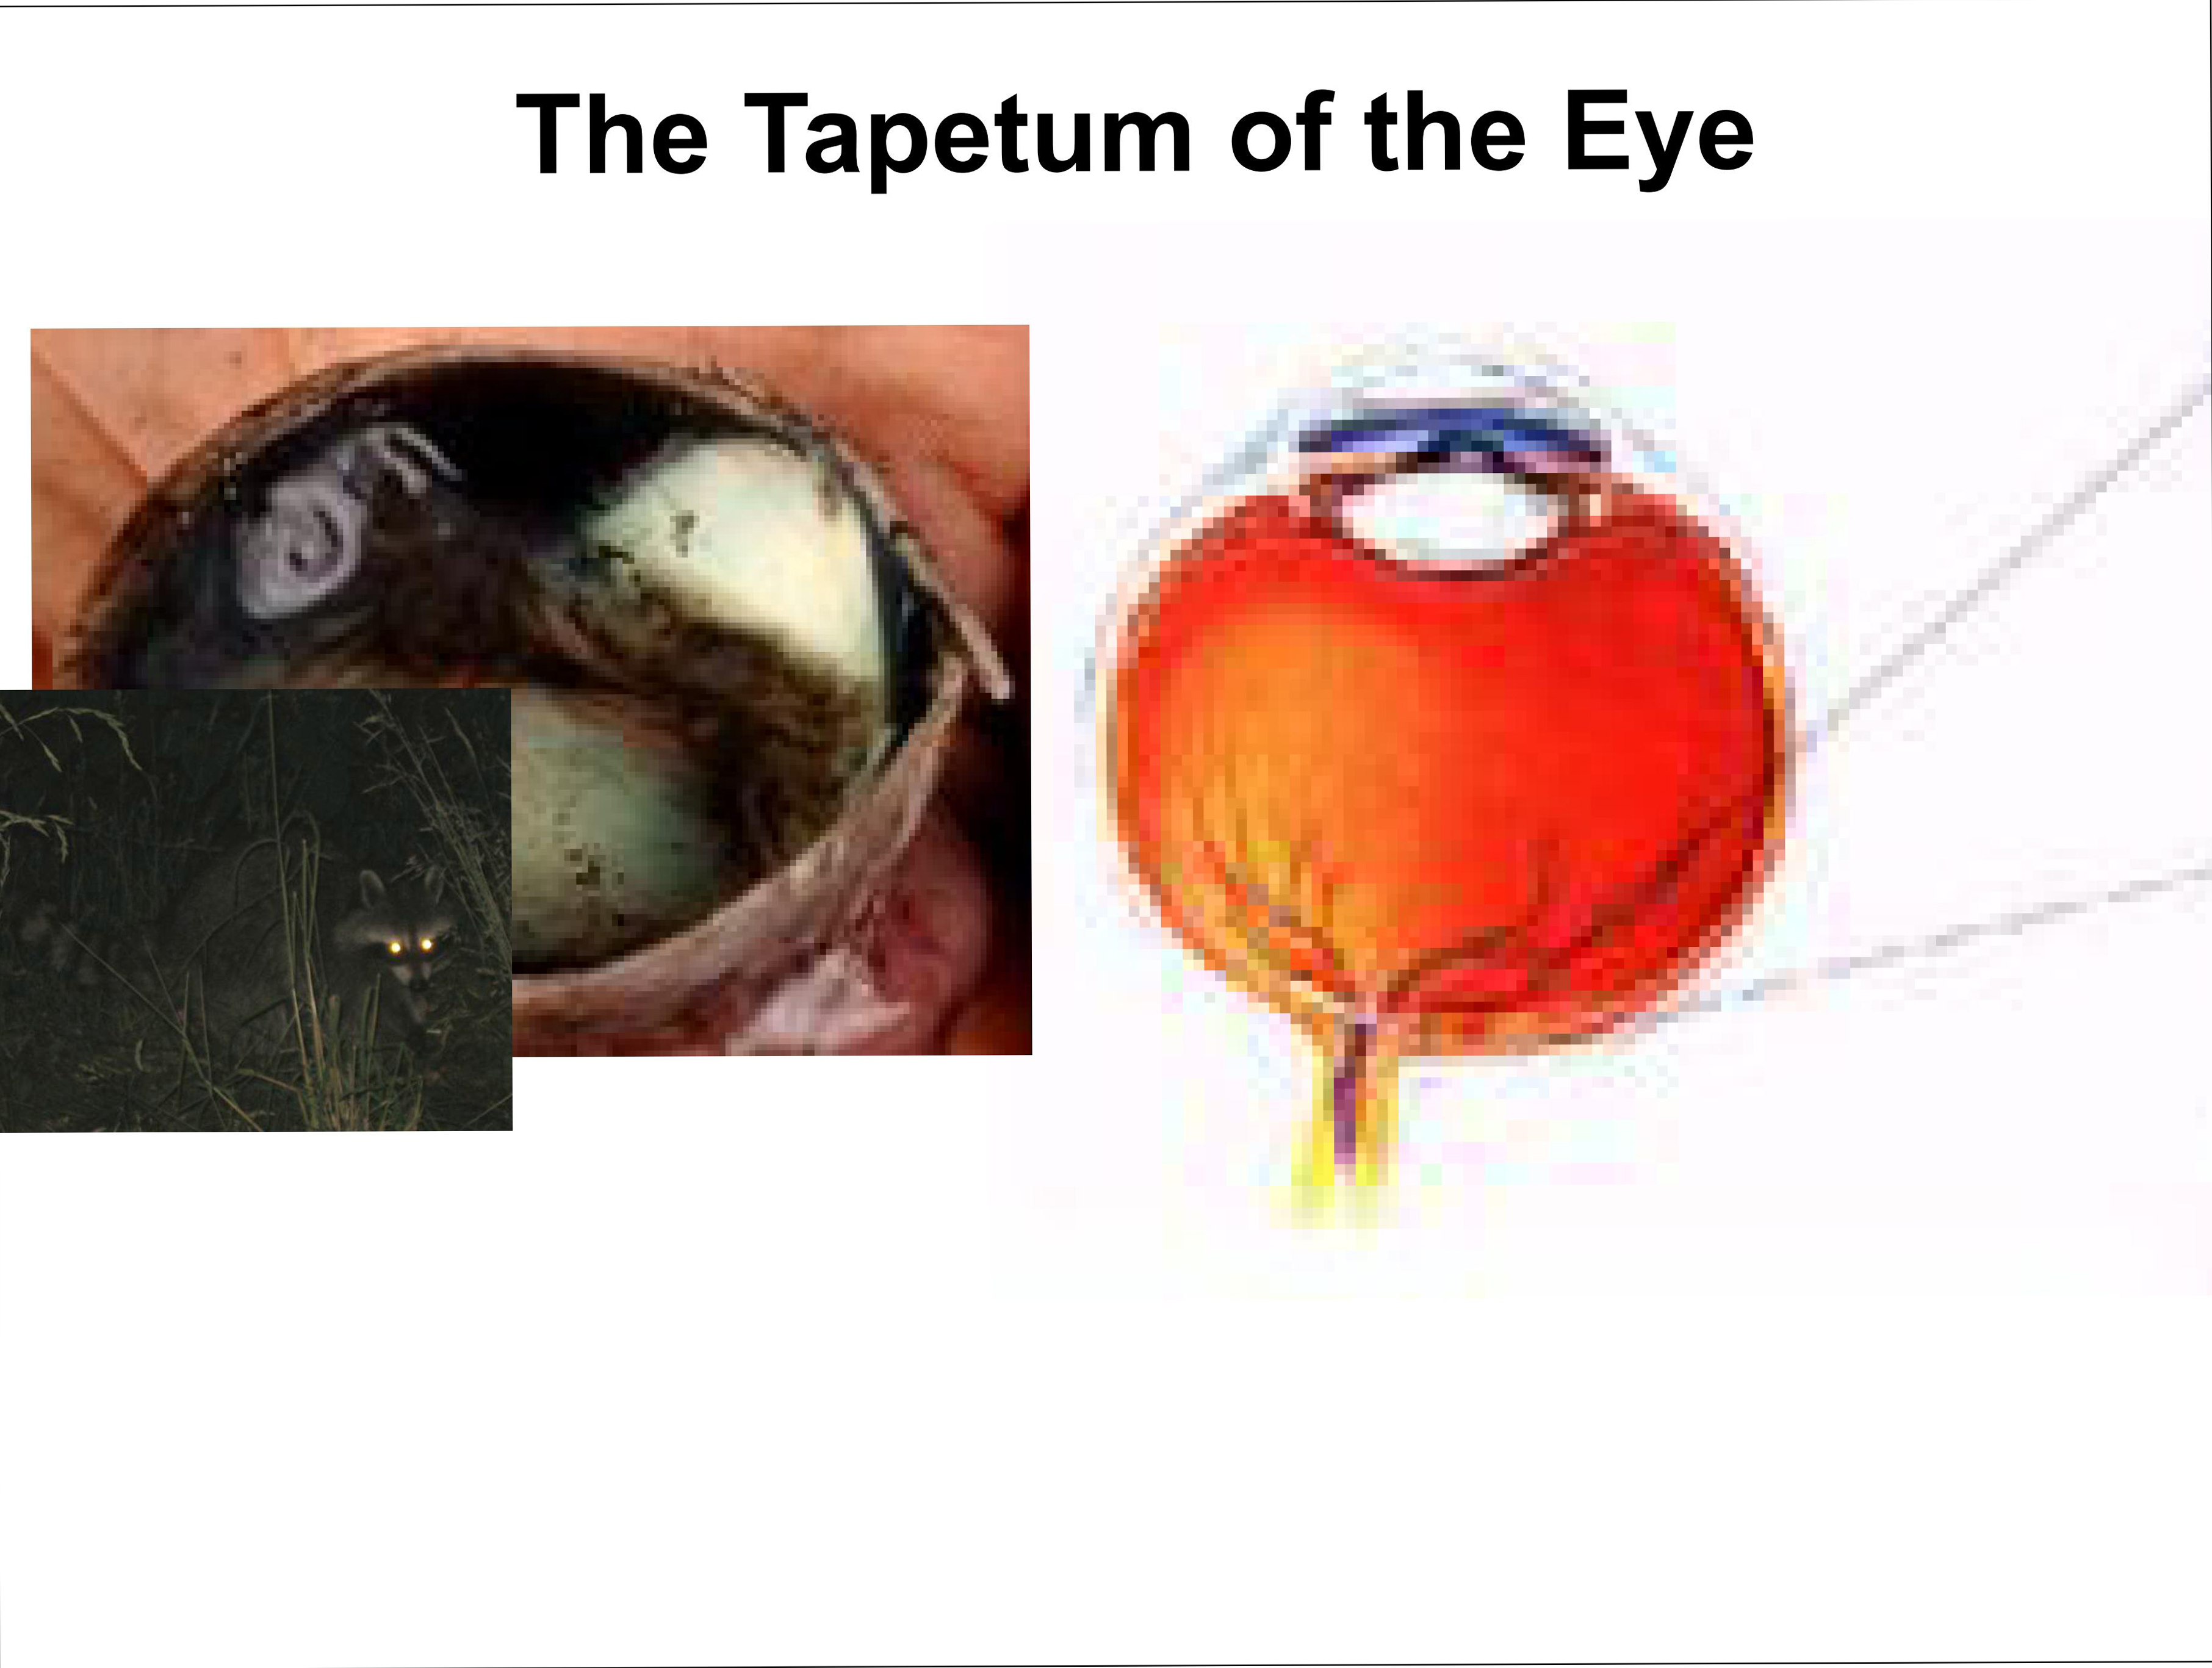 The Tapetum of the Eye